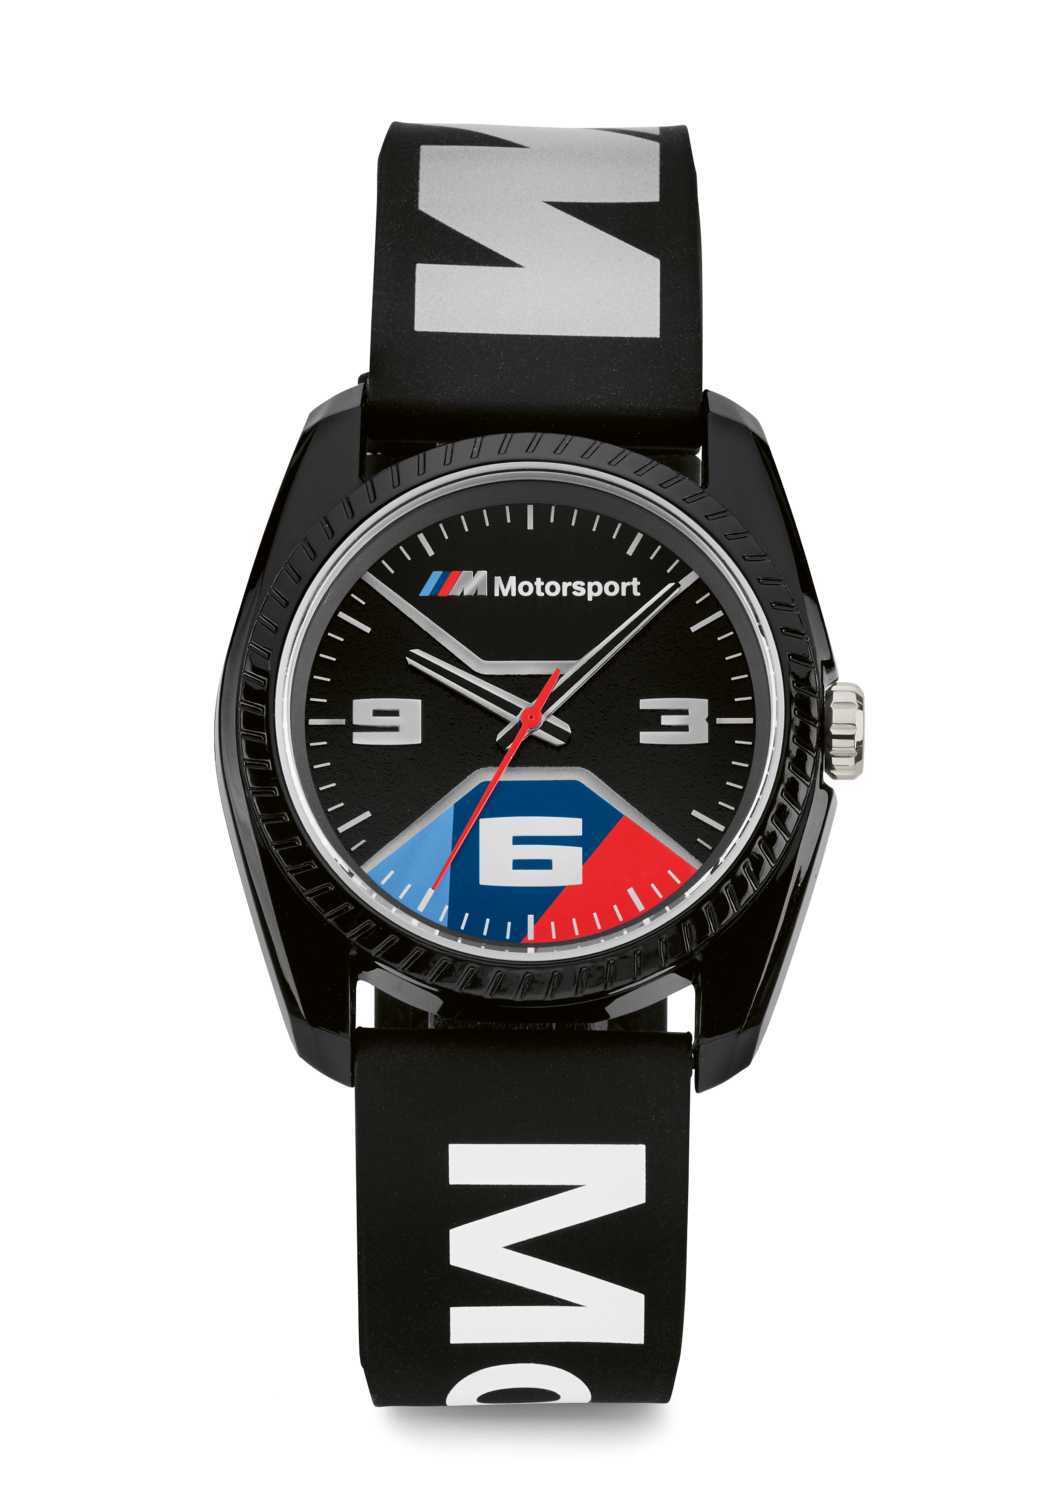 https://mediapool.bmwgroup.com/cache/P9/202004/P90388328/P90388328-launch-of-the-2020-bmw-lifestyle-collections-bmw-m-motorsport-watch-05-2020-1057px.jpg